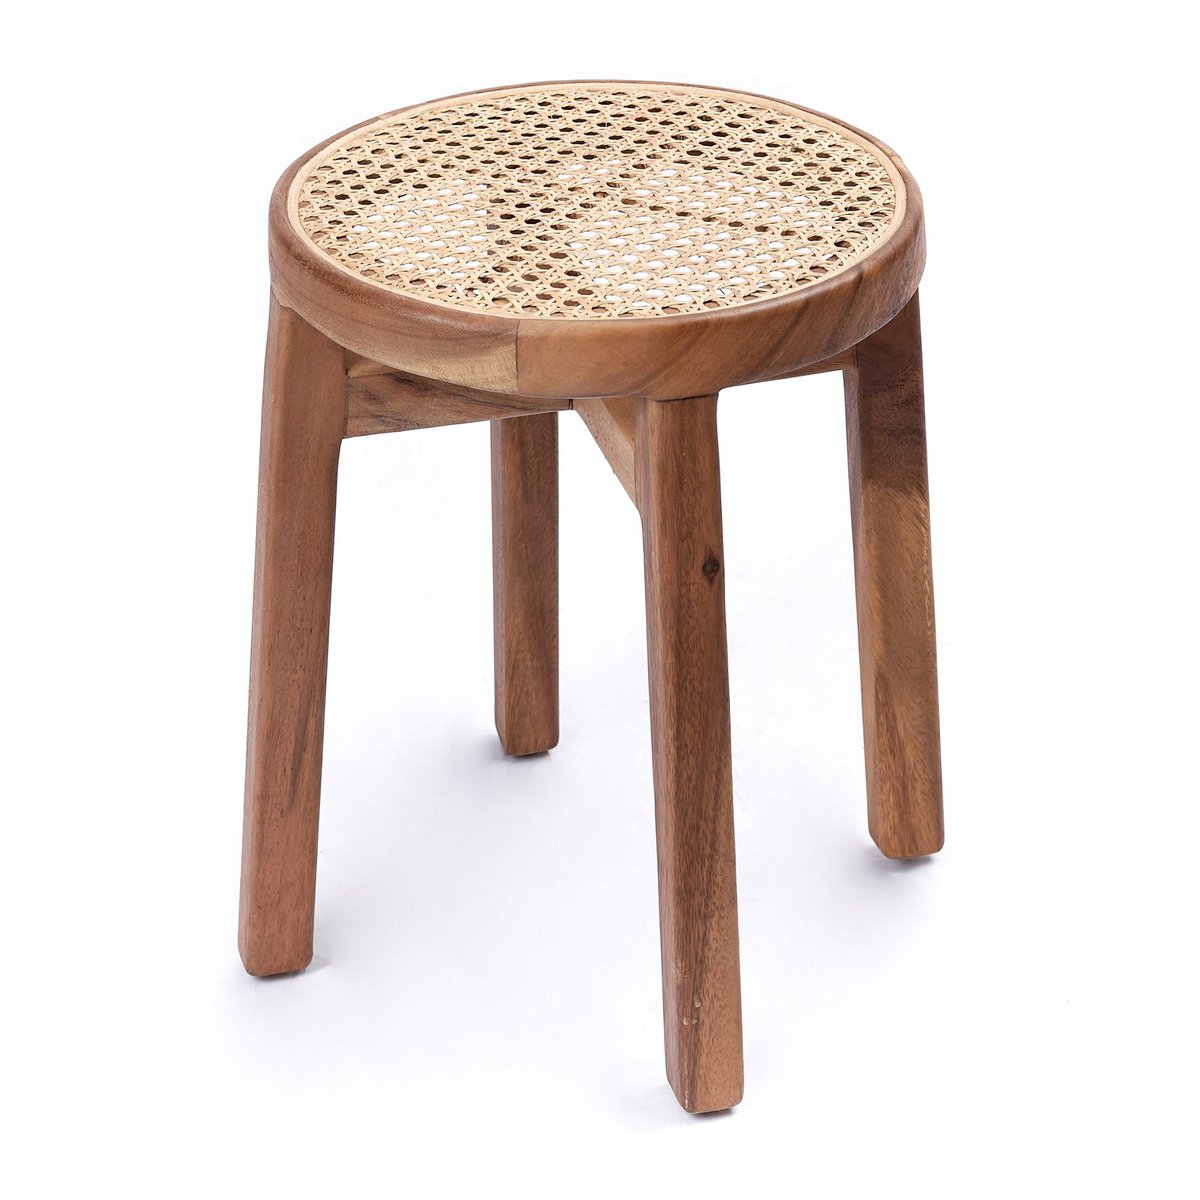 CARAMIN wooden stool made of trembesi and woven rattan